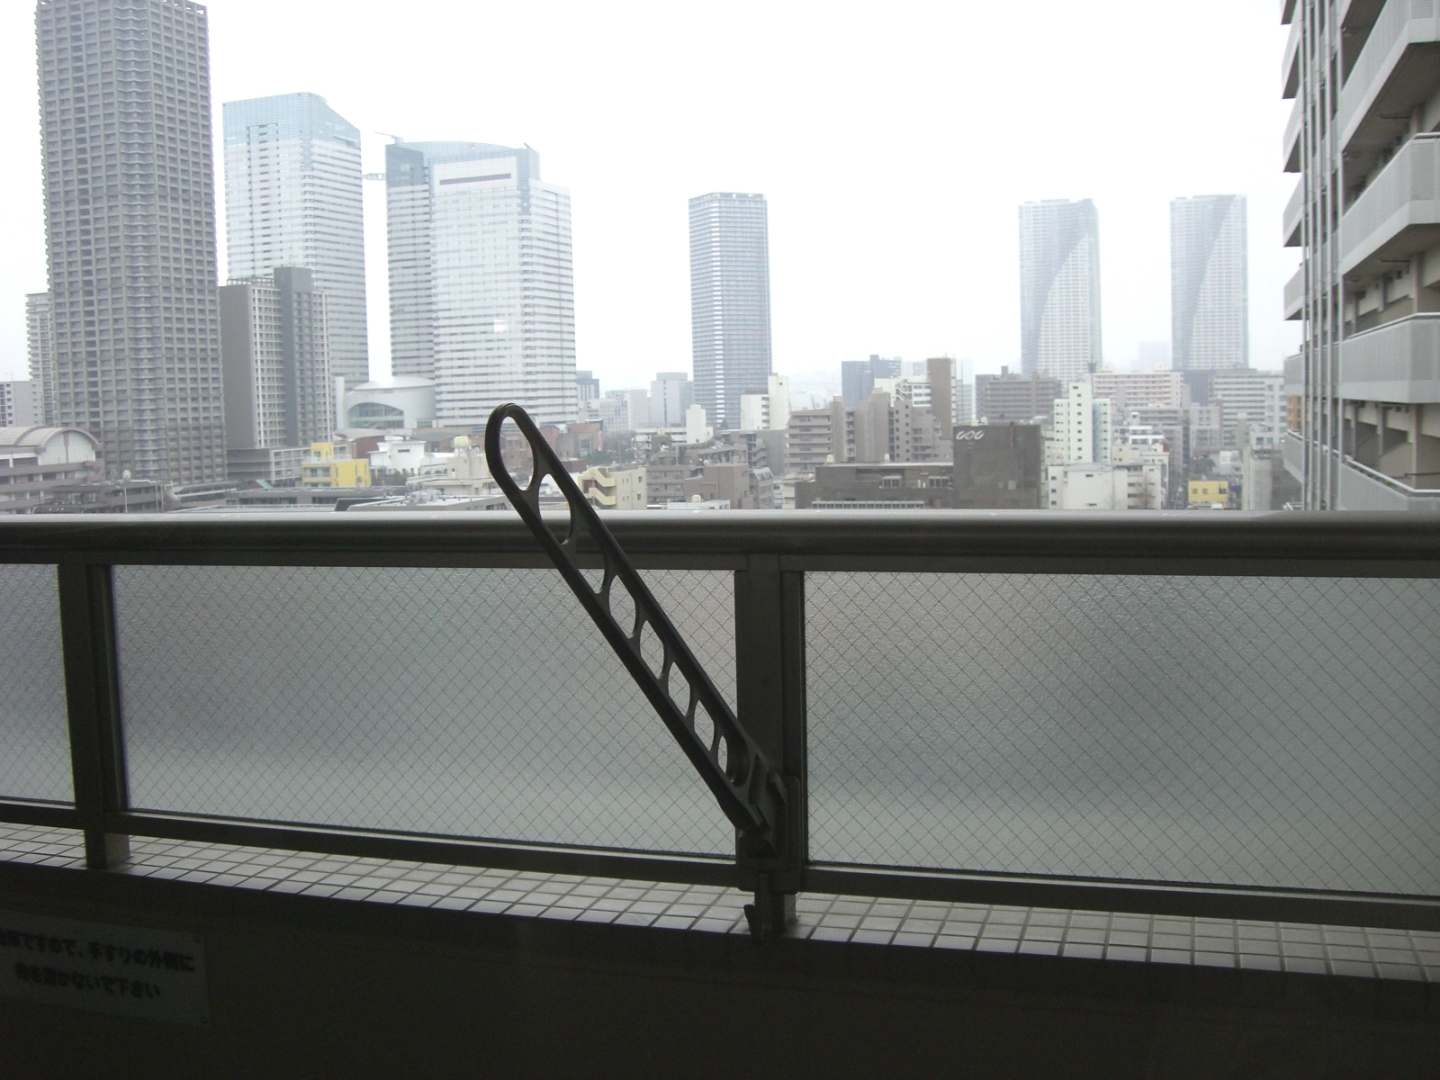 View. High-rise apartment of Tsukuda visible from the corridor side